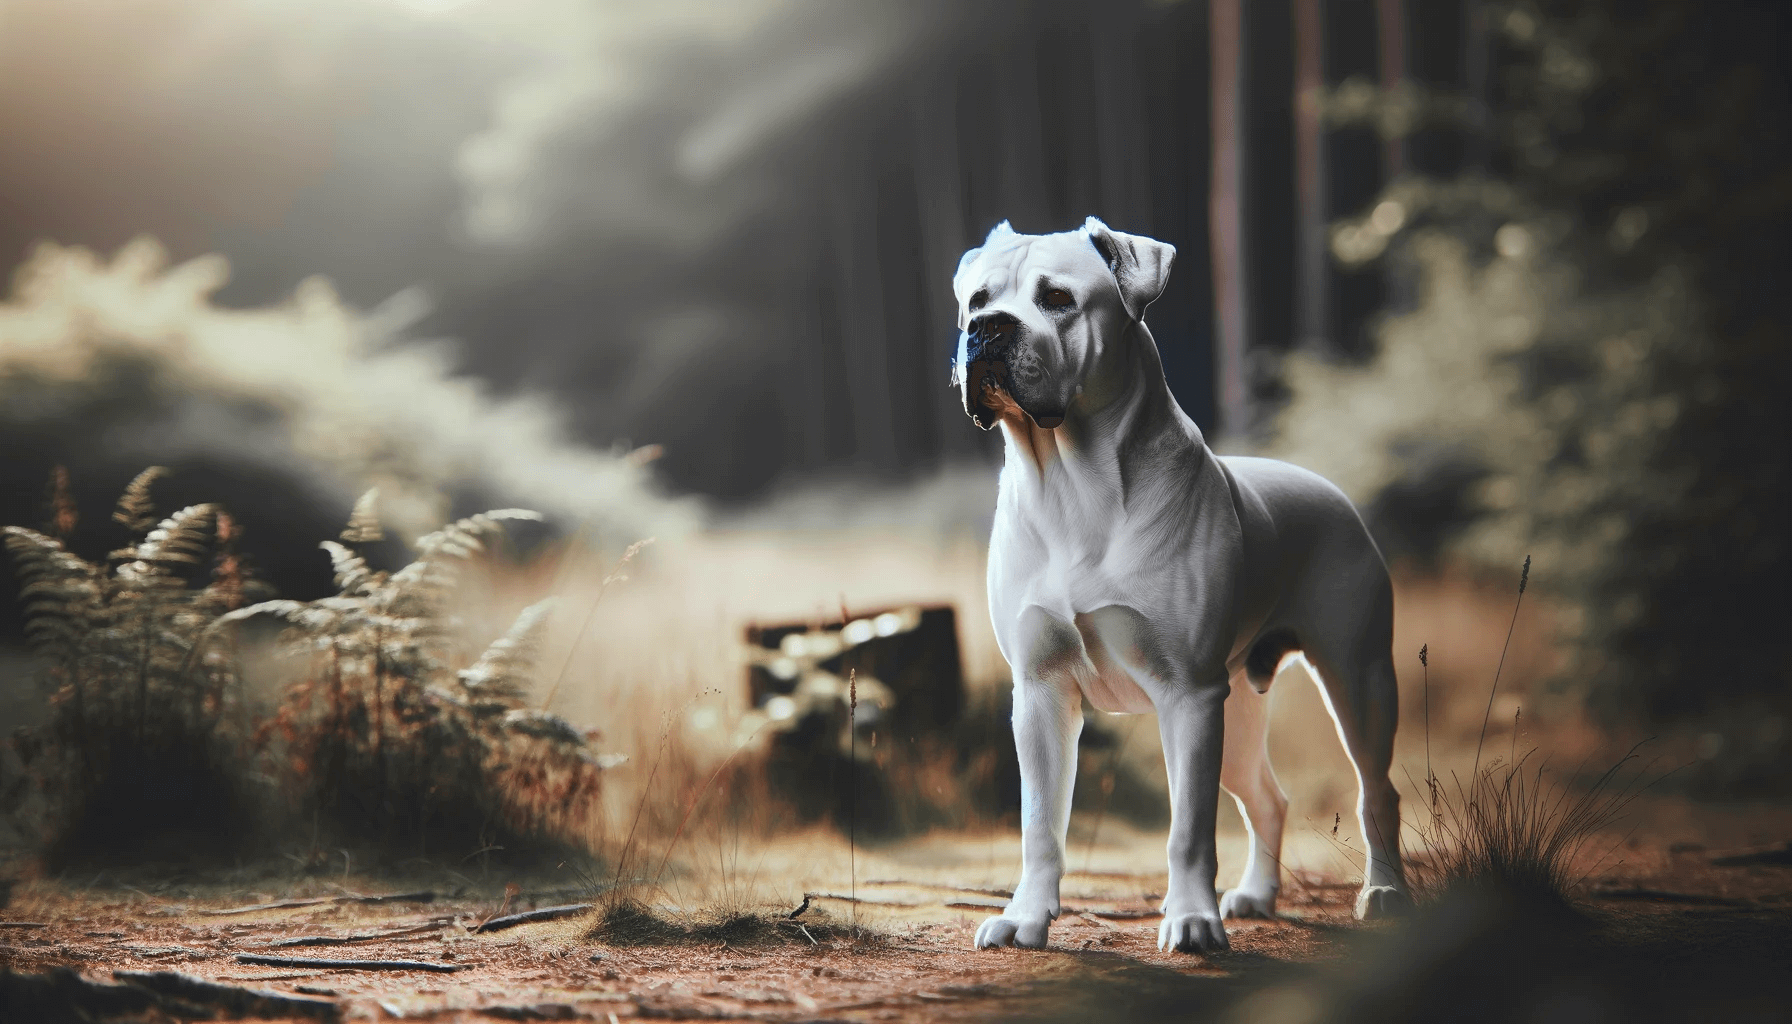 An alert White Cane Corso standing in an outdoor setting, possibly a yard or training ground.